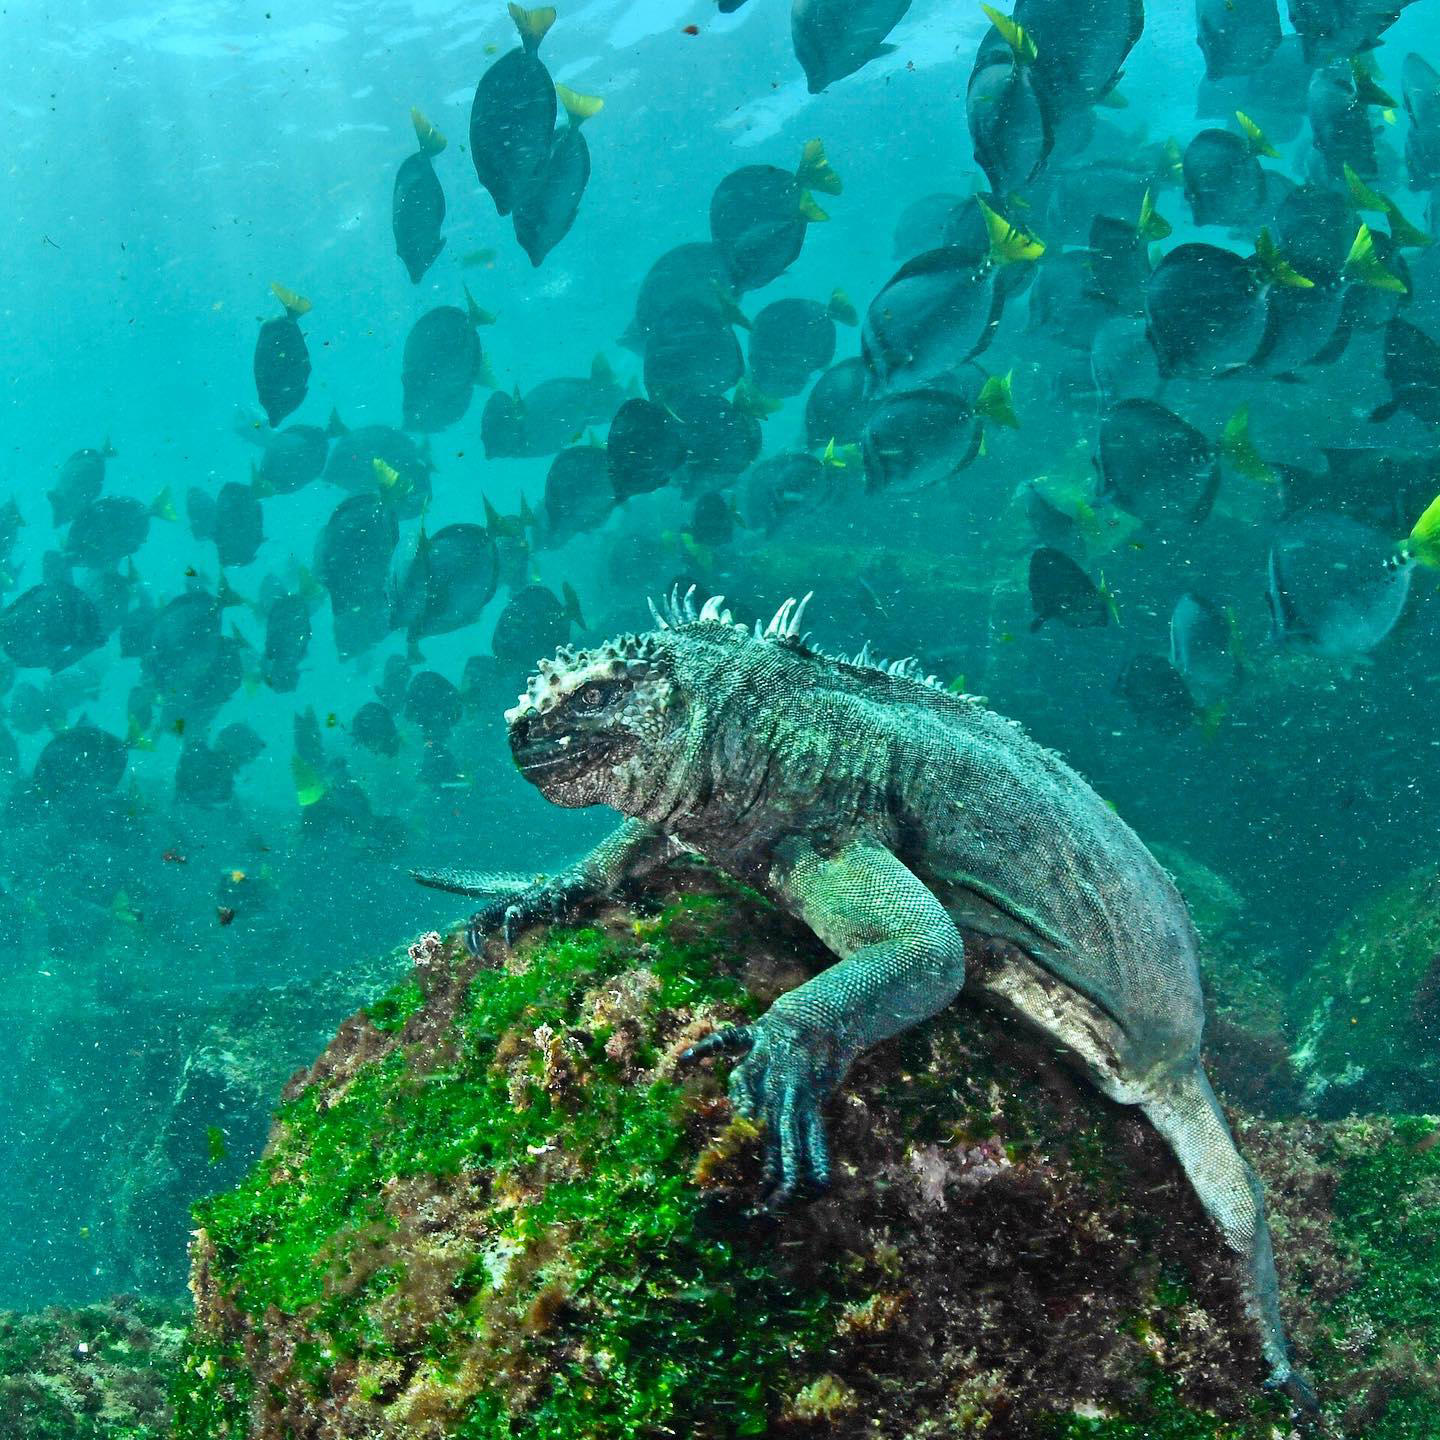 image  1 Thomas Peschak - Fantastic conservation news from the Galápagos